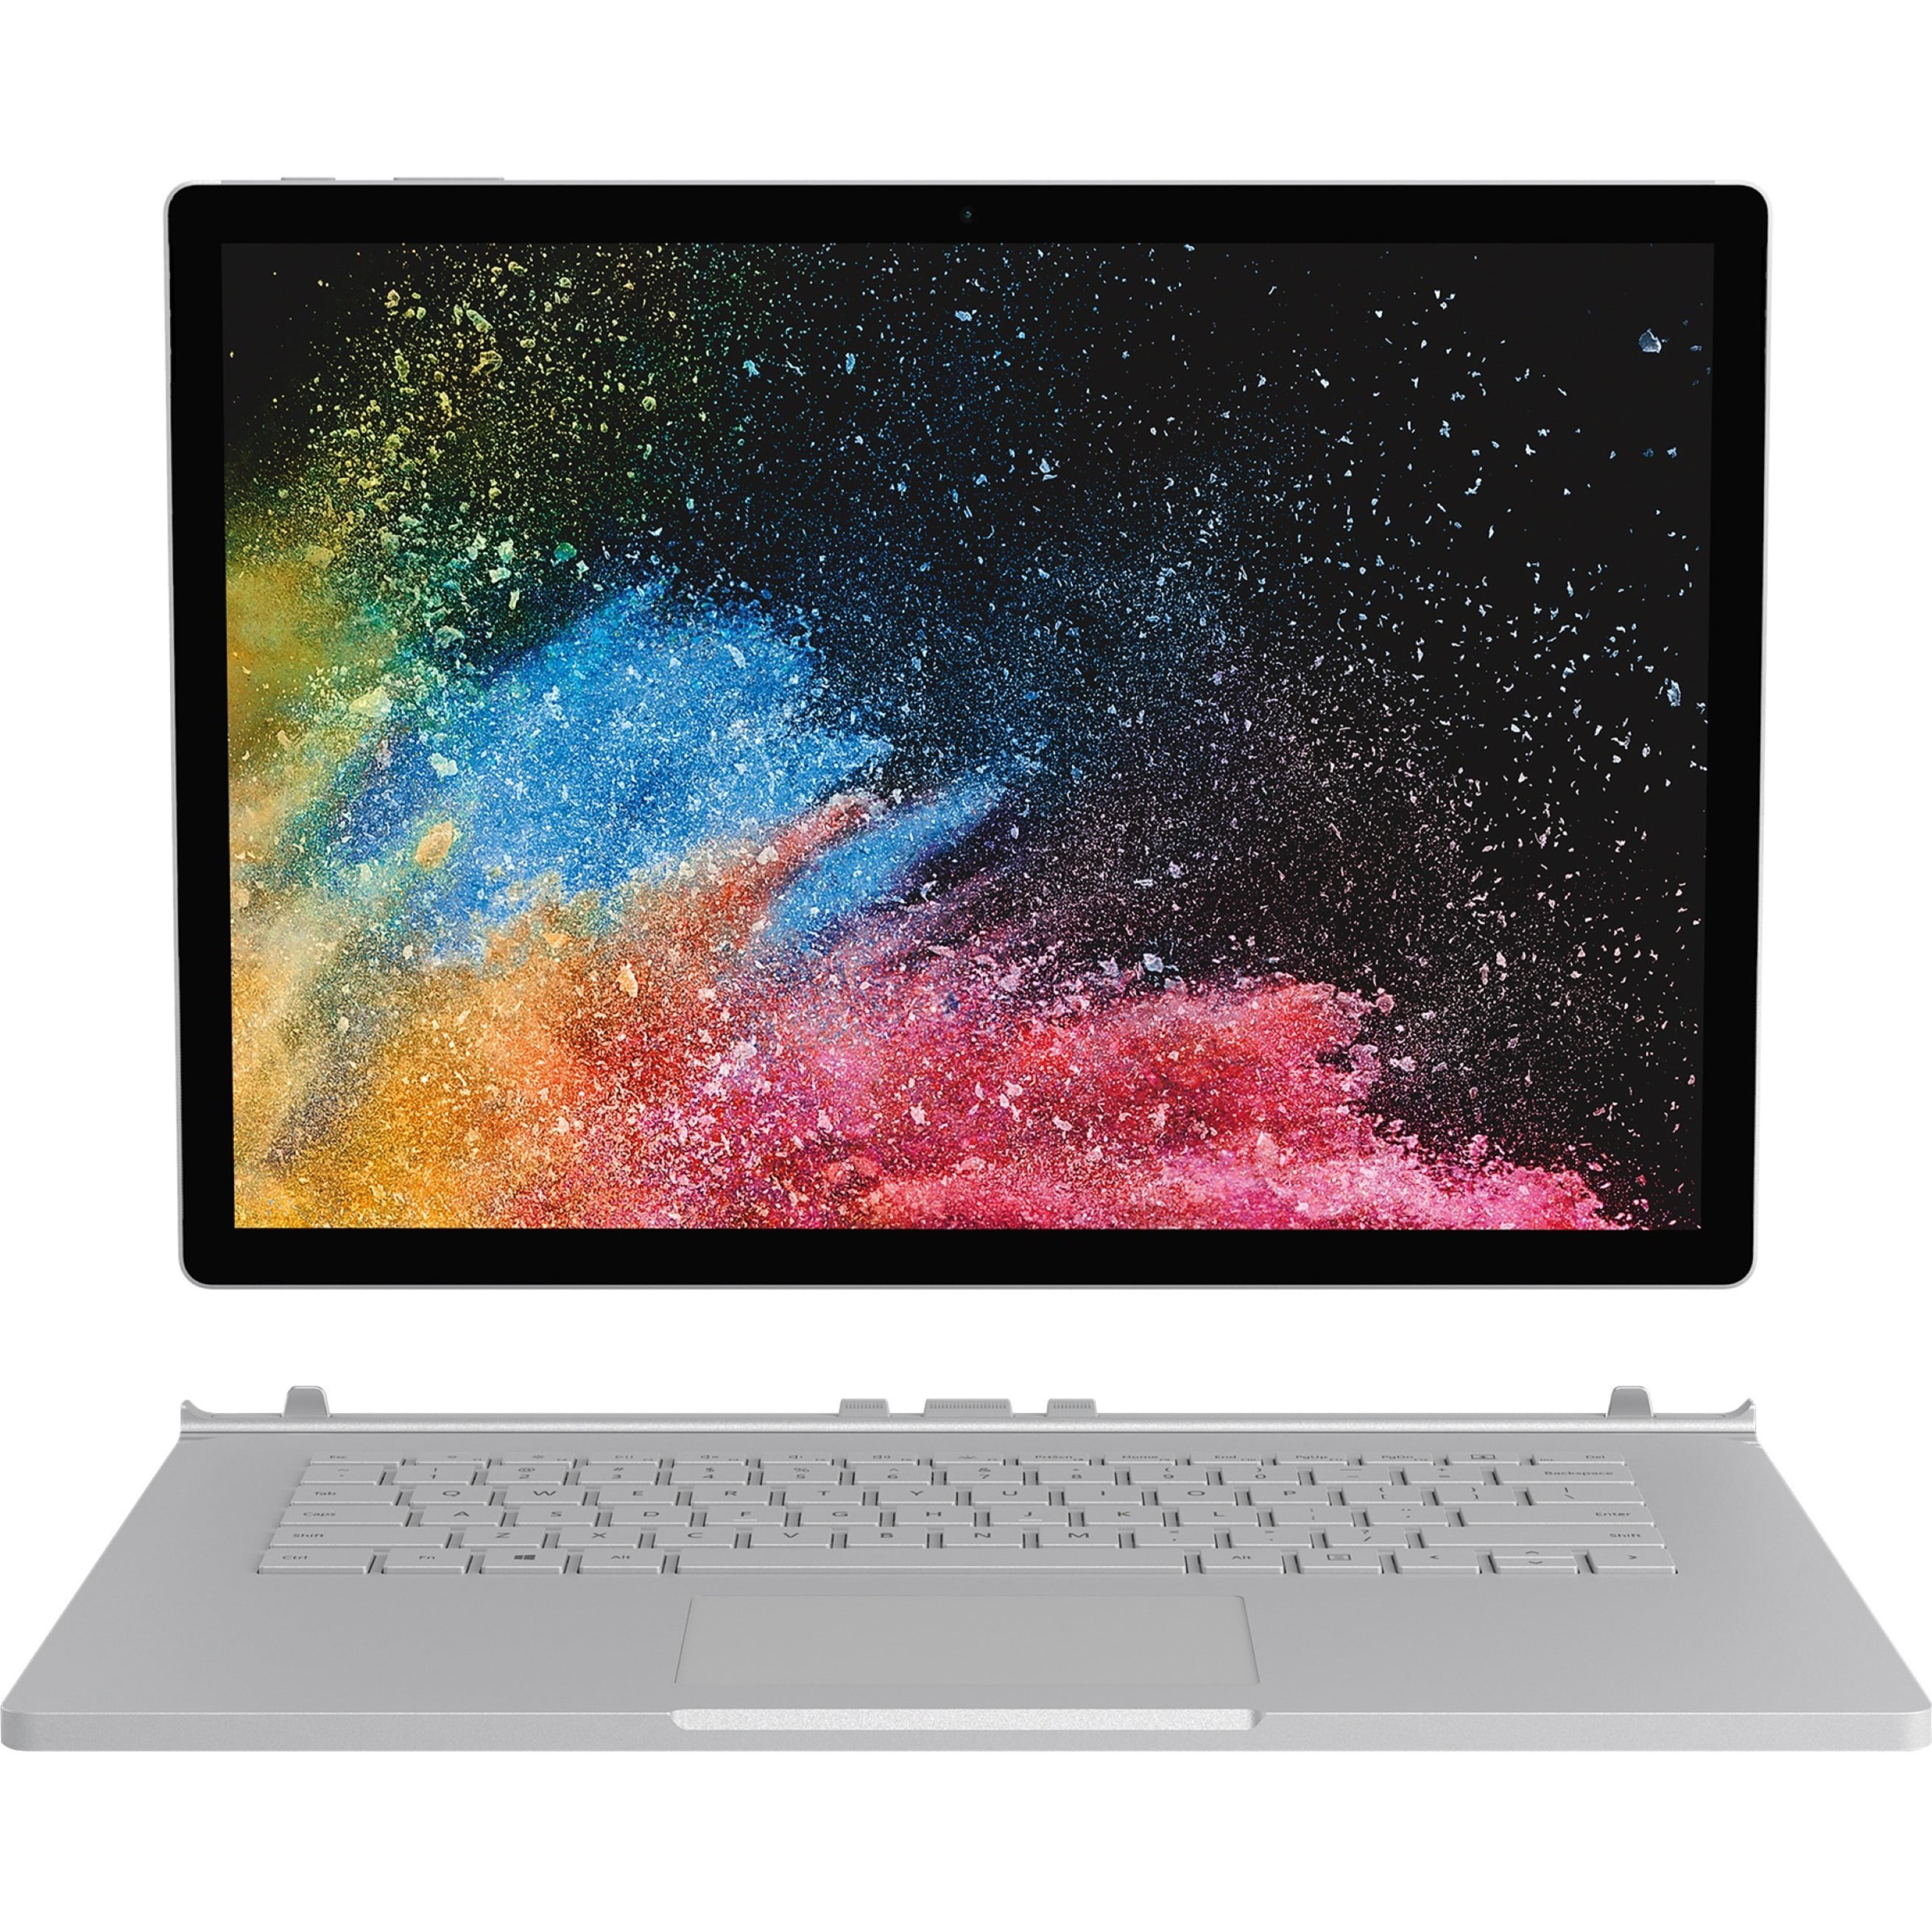 Microsoft Surface Book 2 15" Touchscreen 2-in-1 Laptop, Intel Core i7